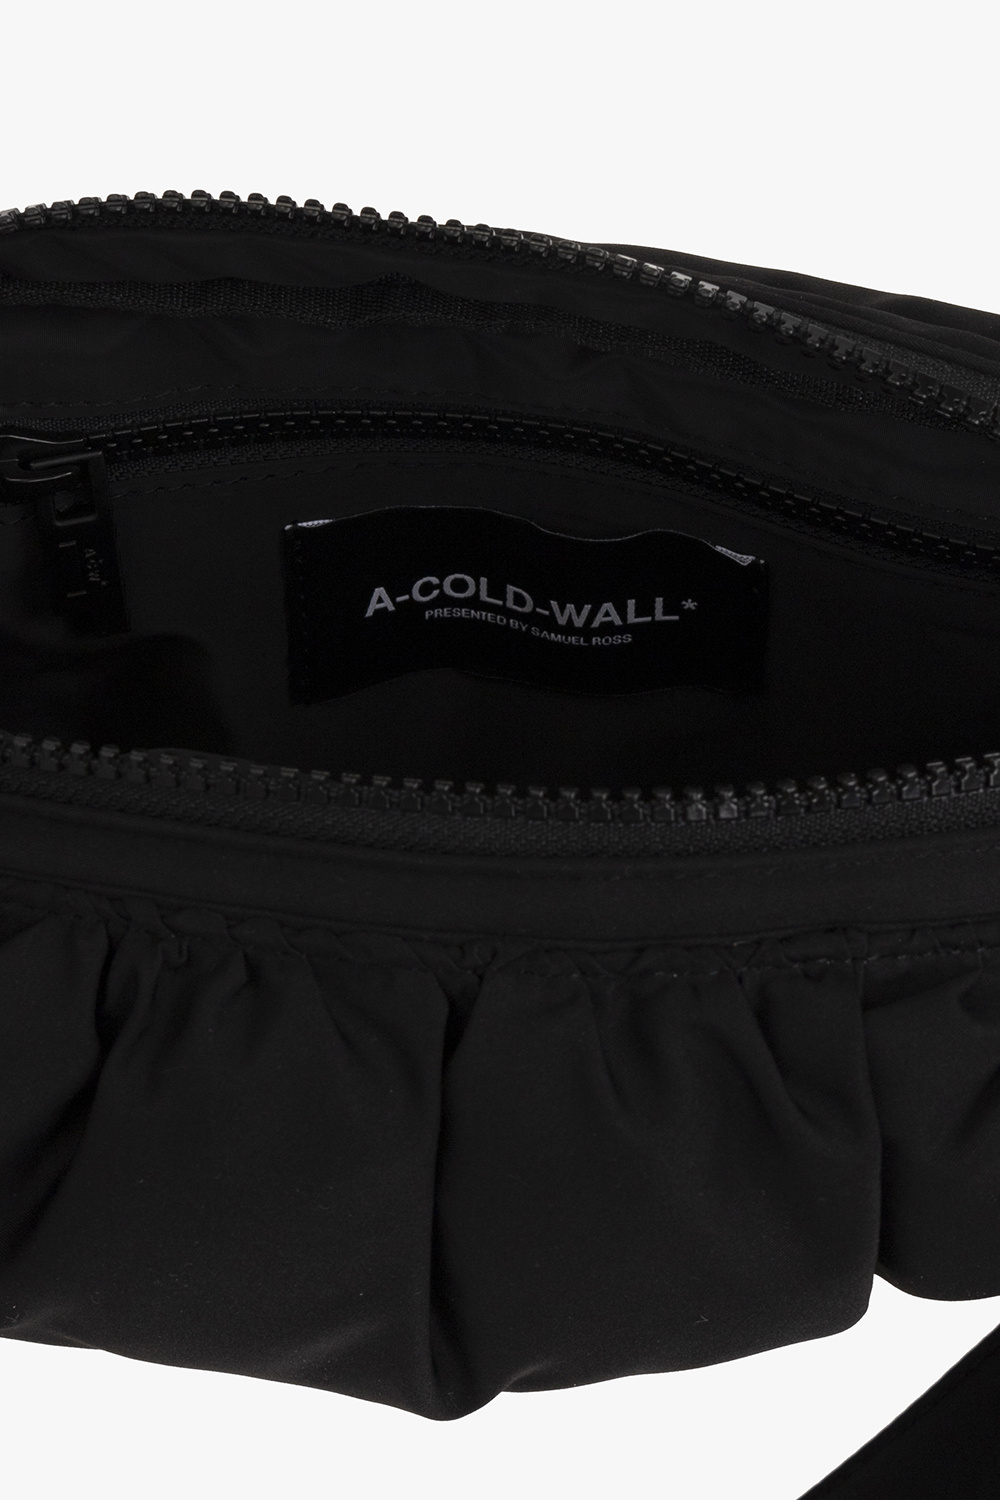 A-COLD-WALL* Shoulder bag Rosso with logo